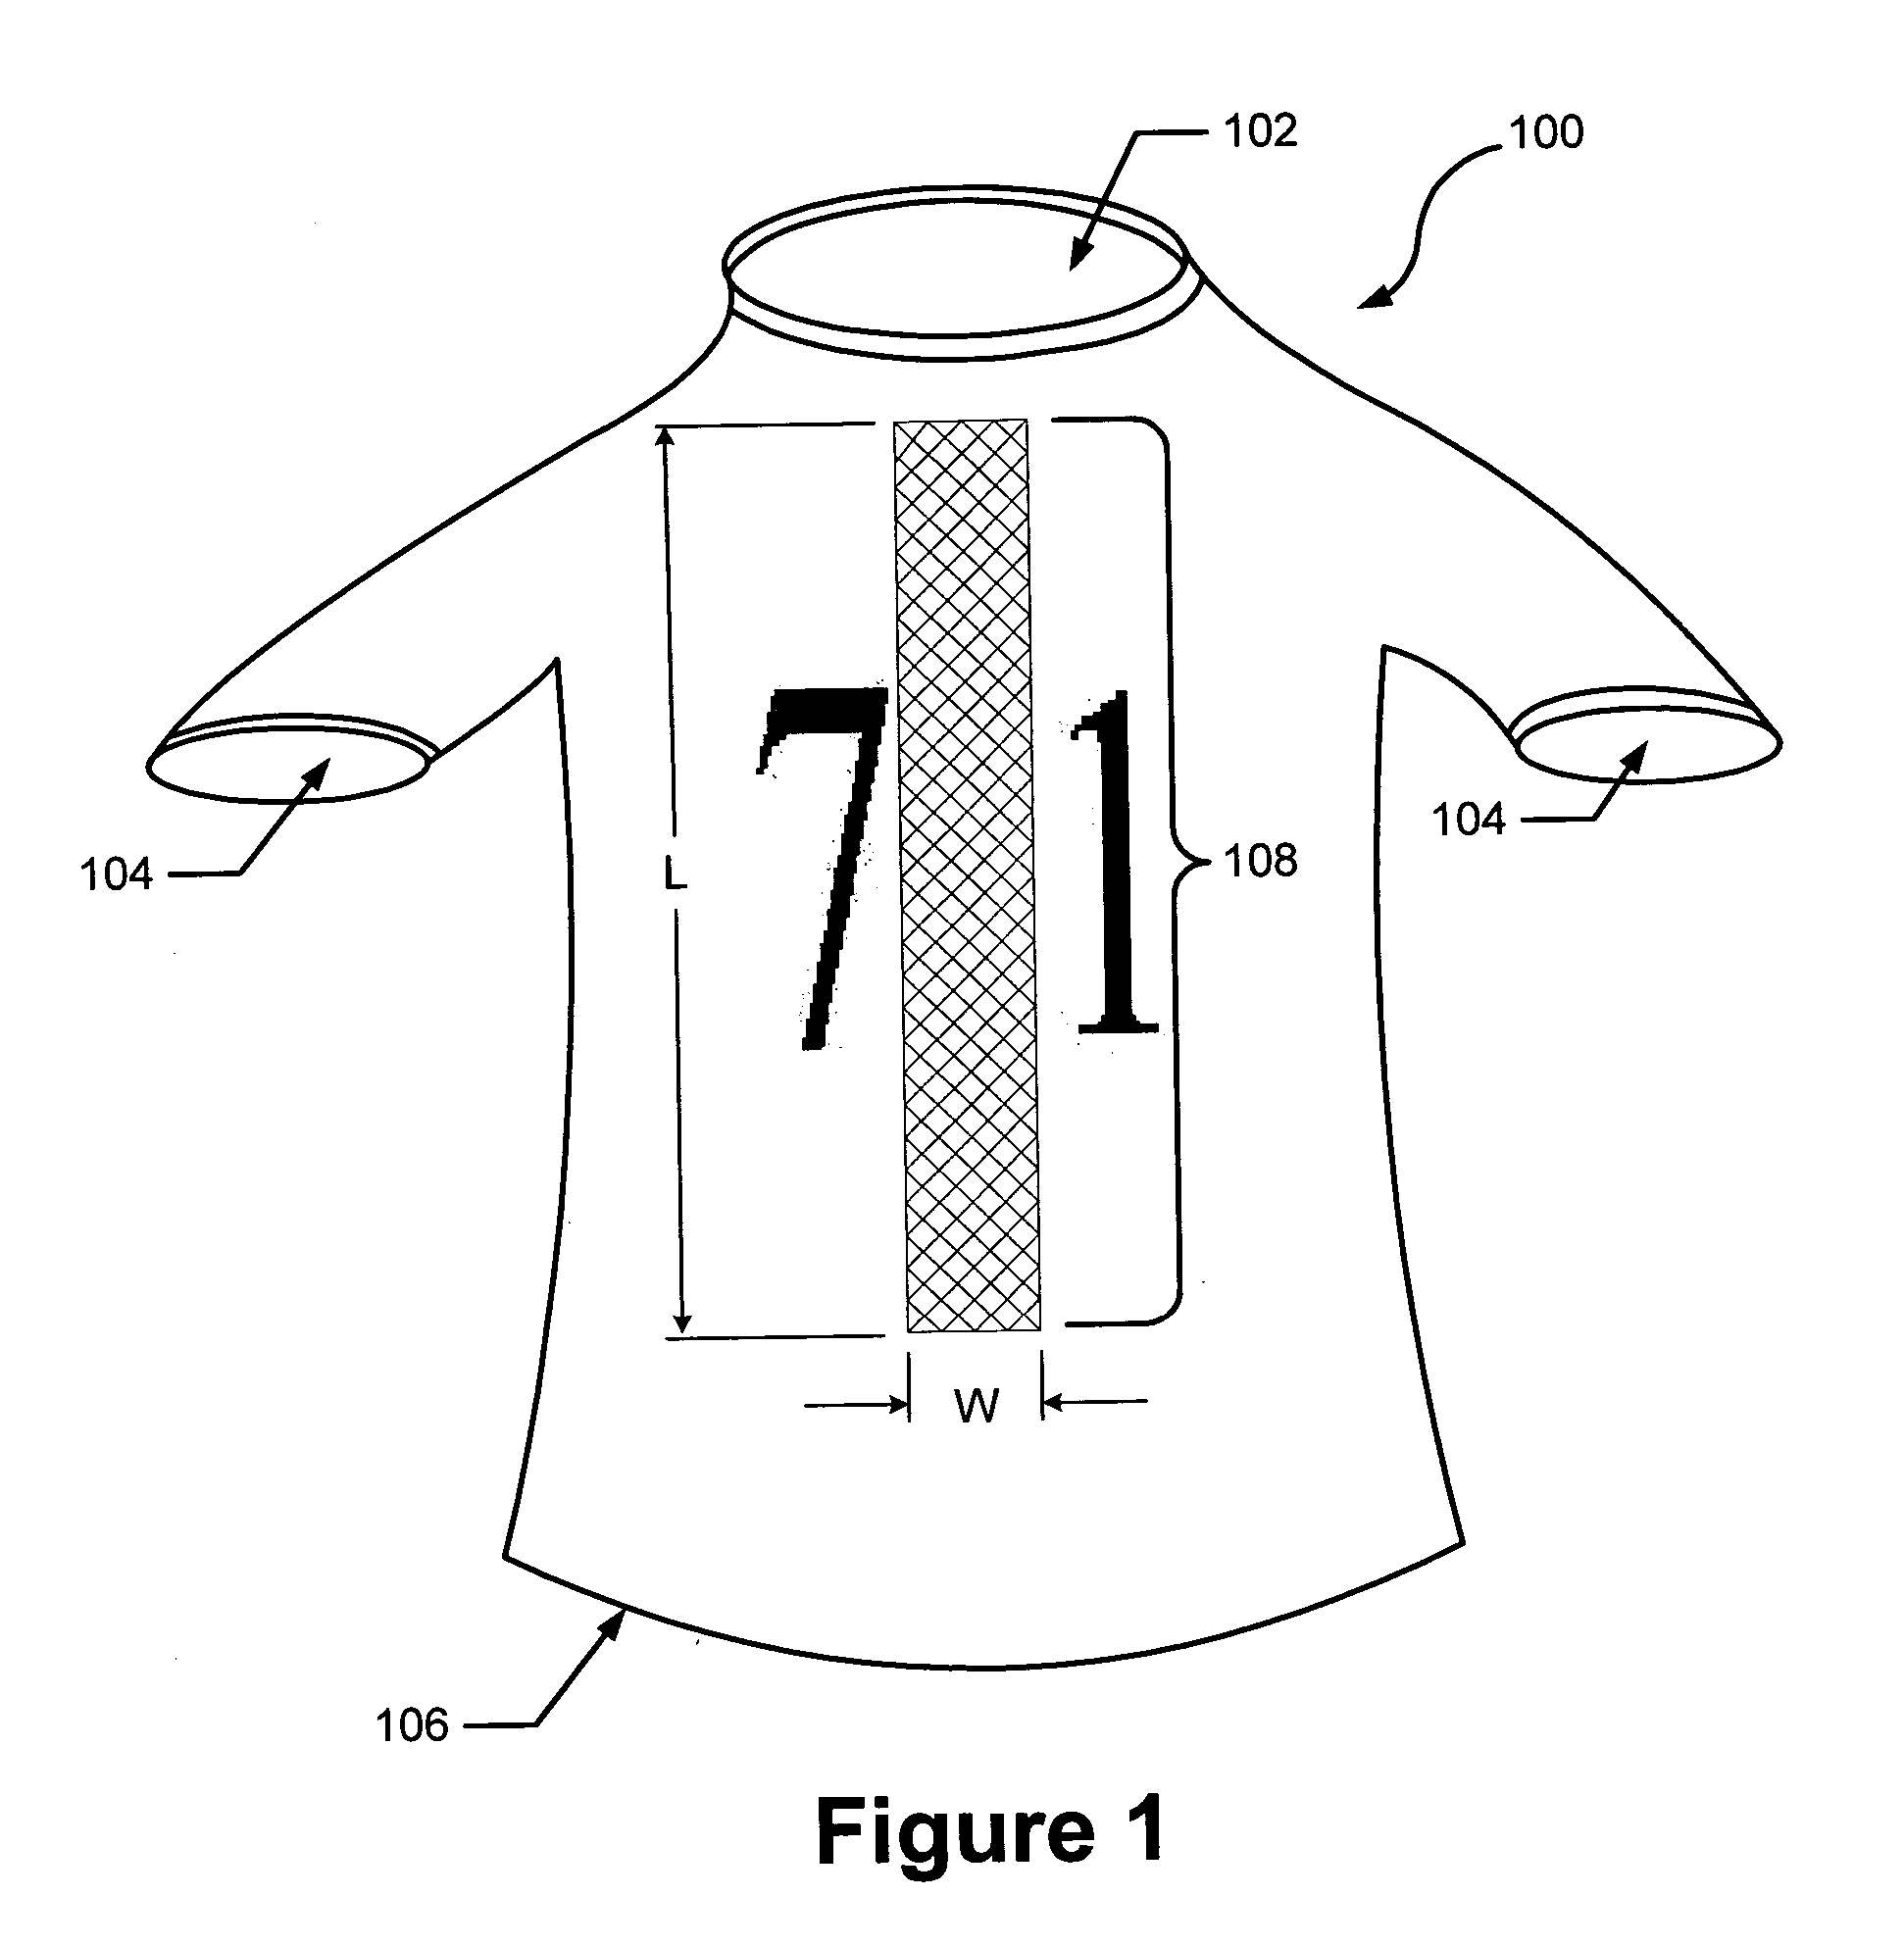 Article of apparel incorporating a zoned modifiable textile structure